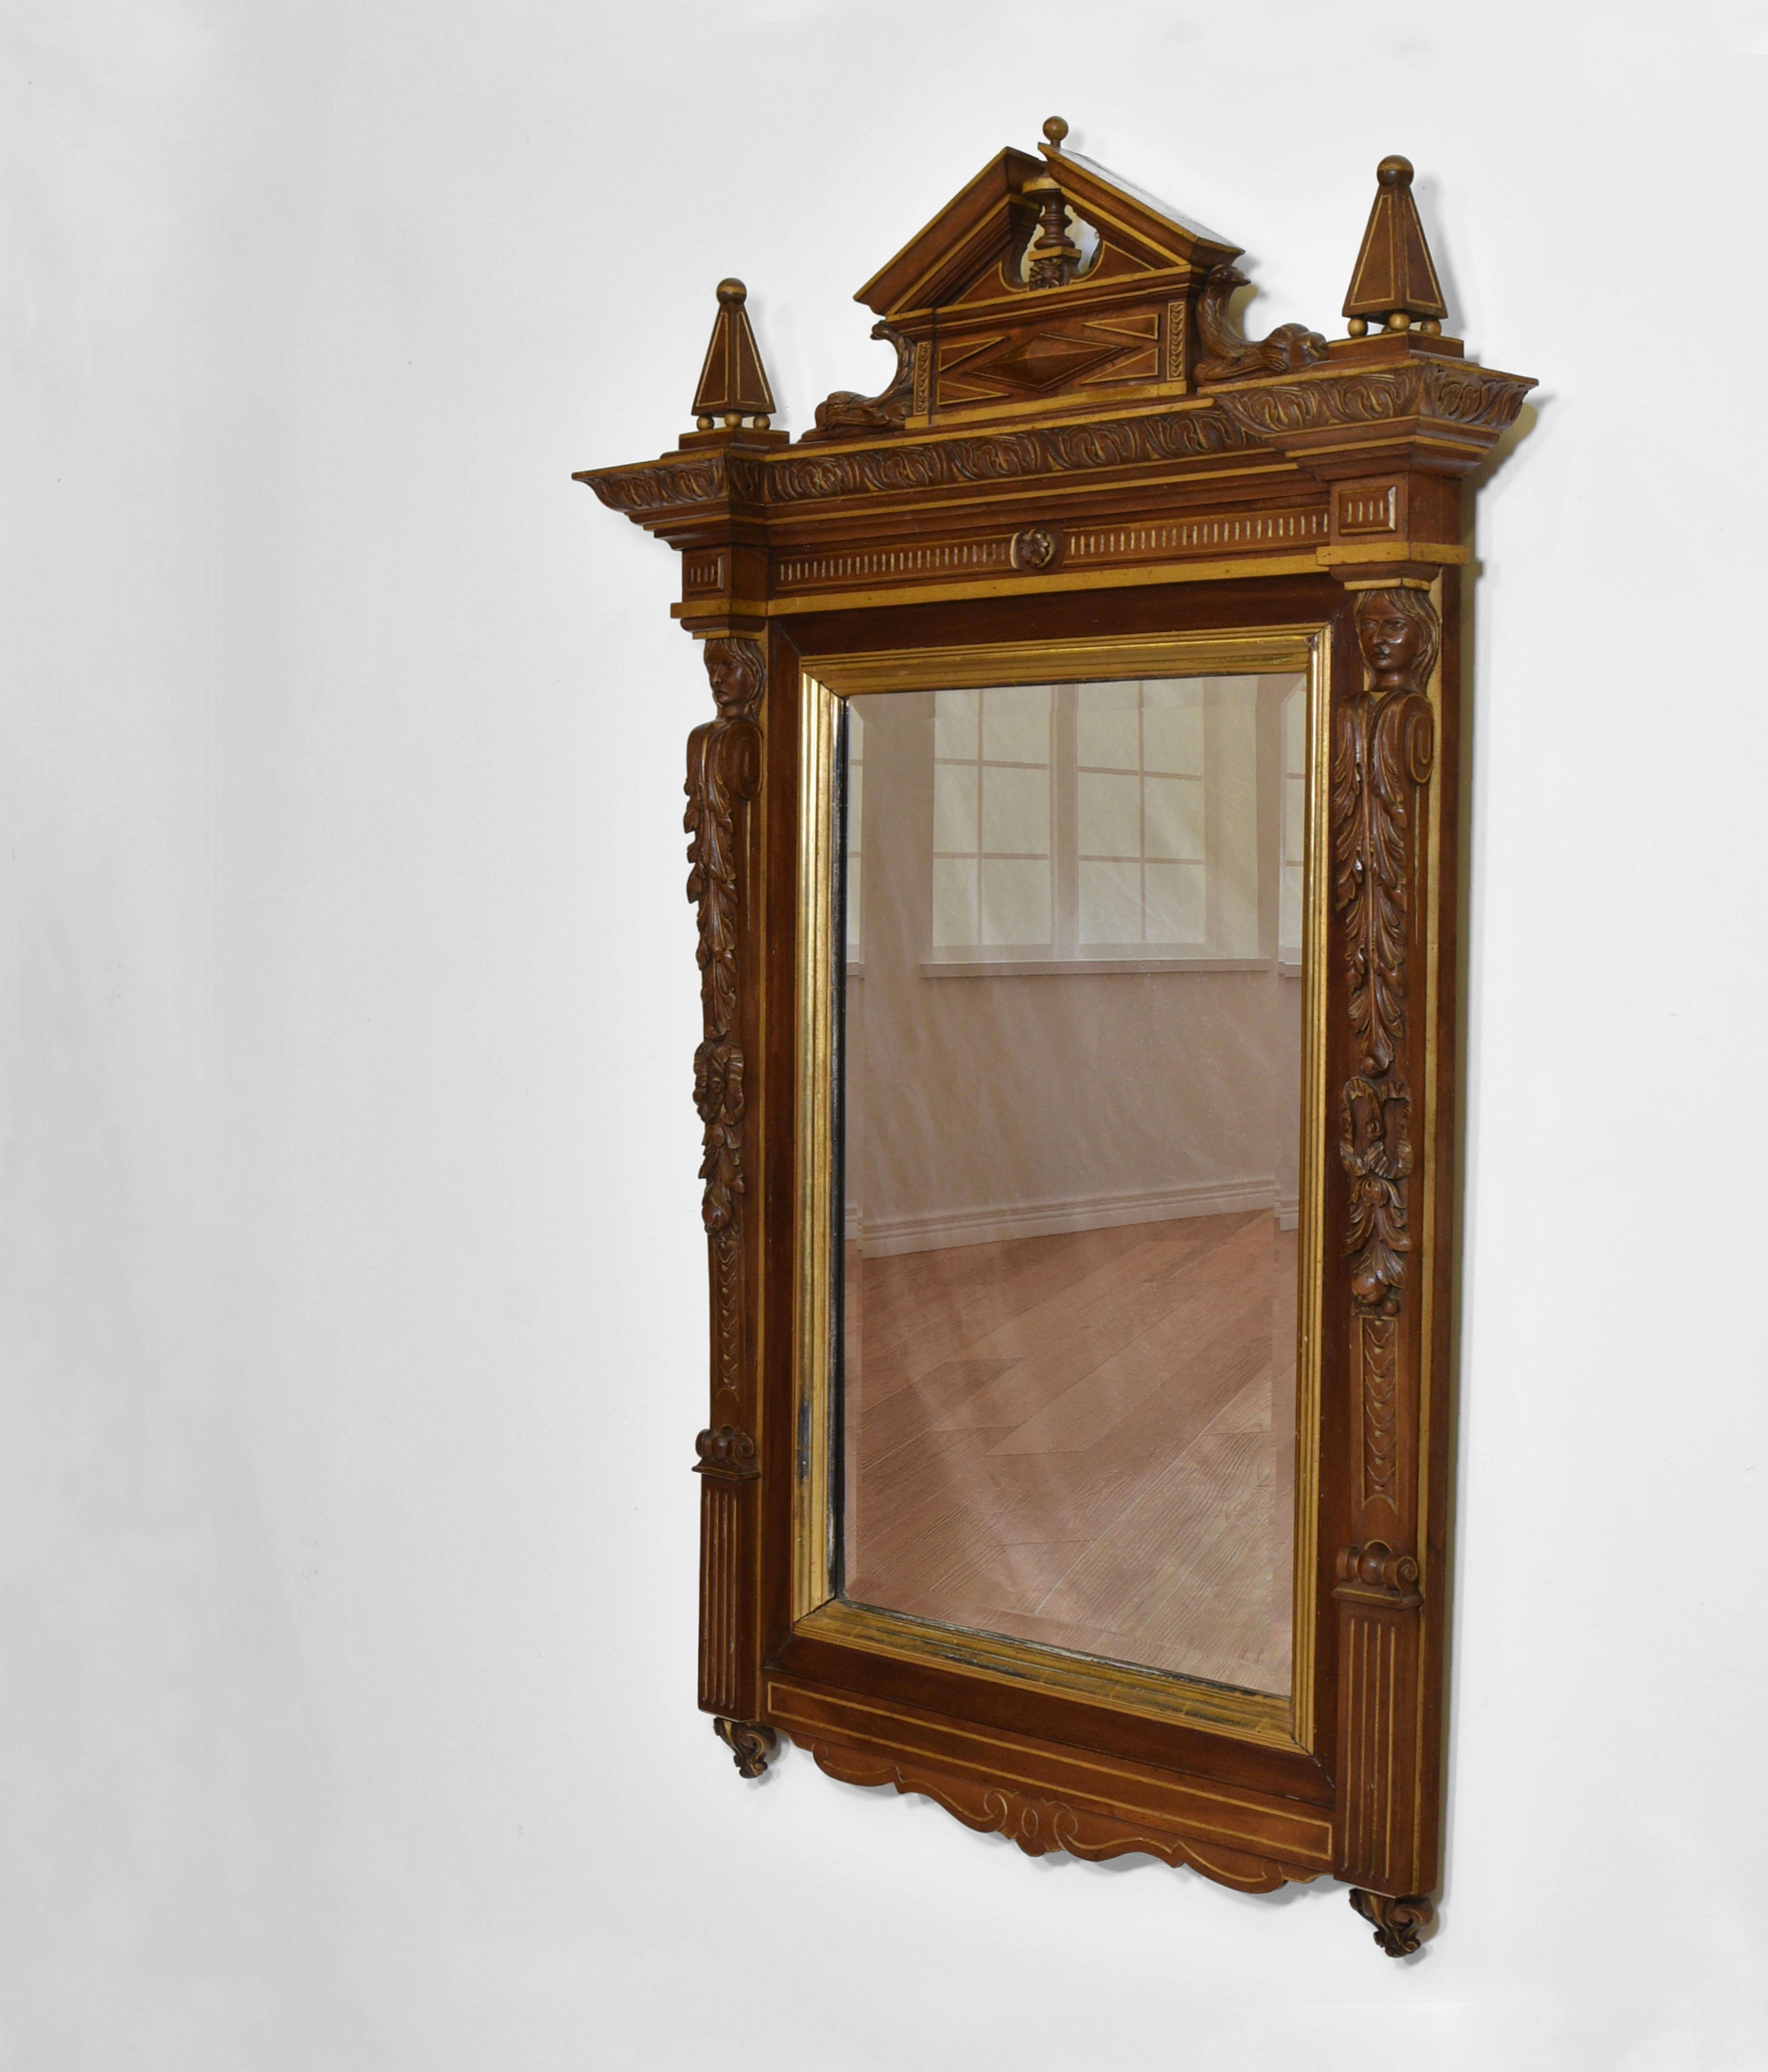 19th century Renaissance revival walnut and gilt wall mirror. Circa 1880.

The mirror has an architectural flavour. It is topped by a broken pediment with mythical carved animals, each banked by an obelisk. The column on either side of the glass